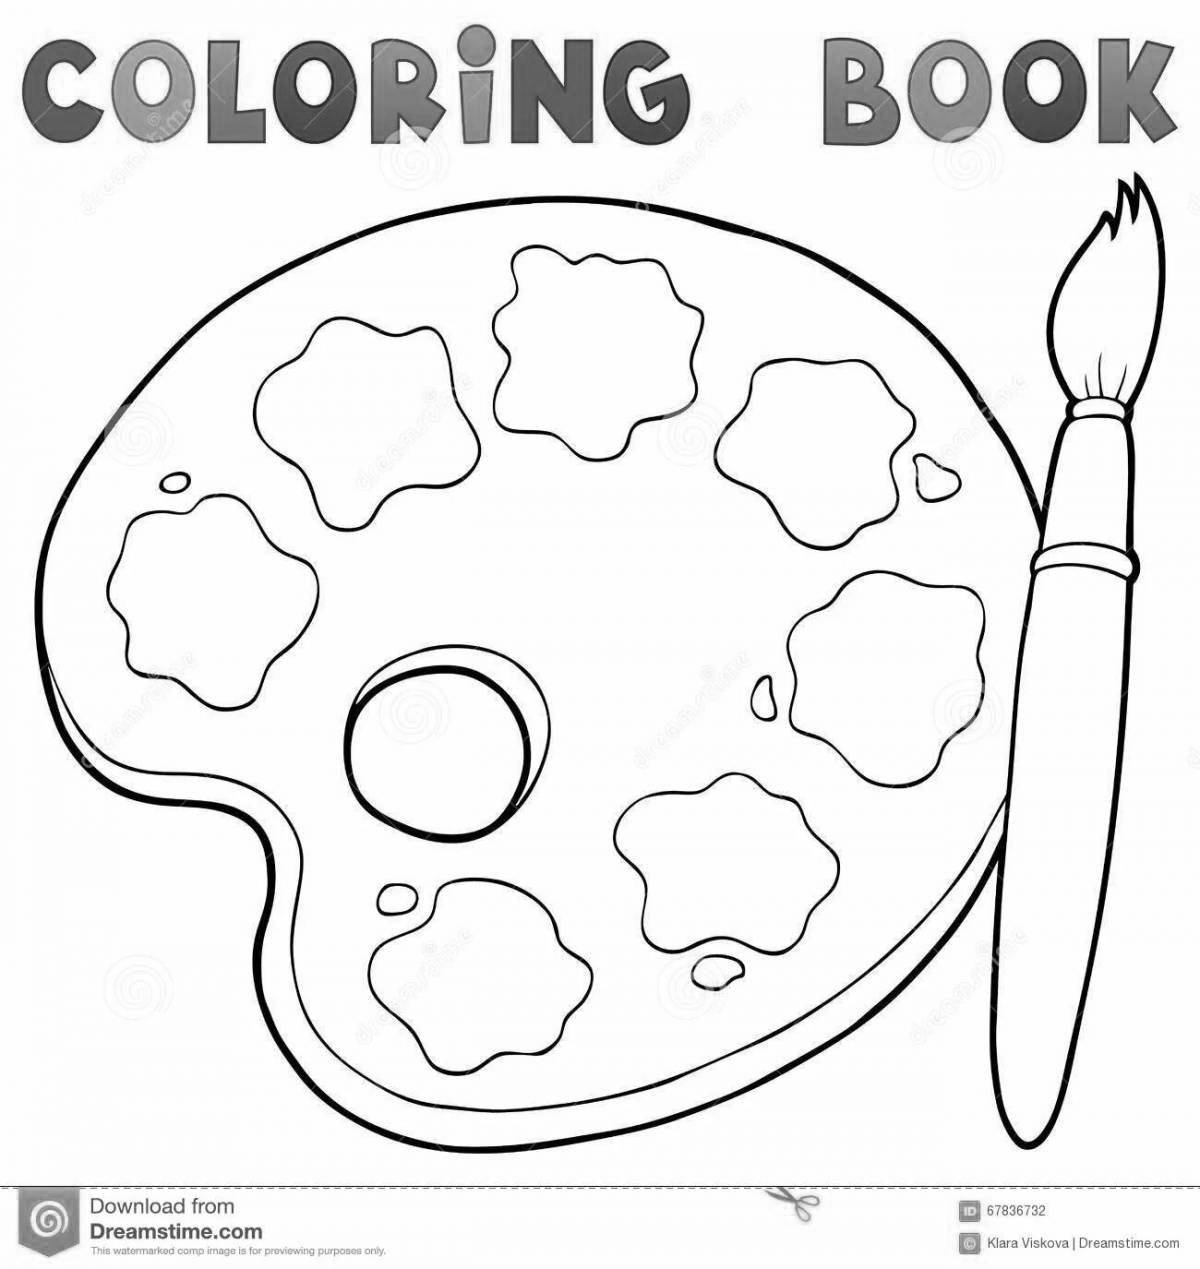 Adorable coloring palette for kids